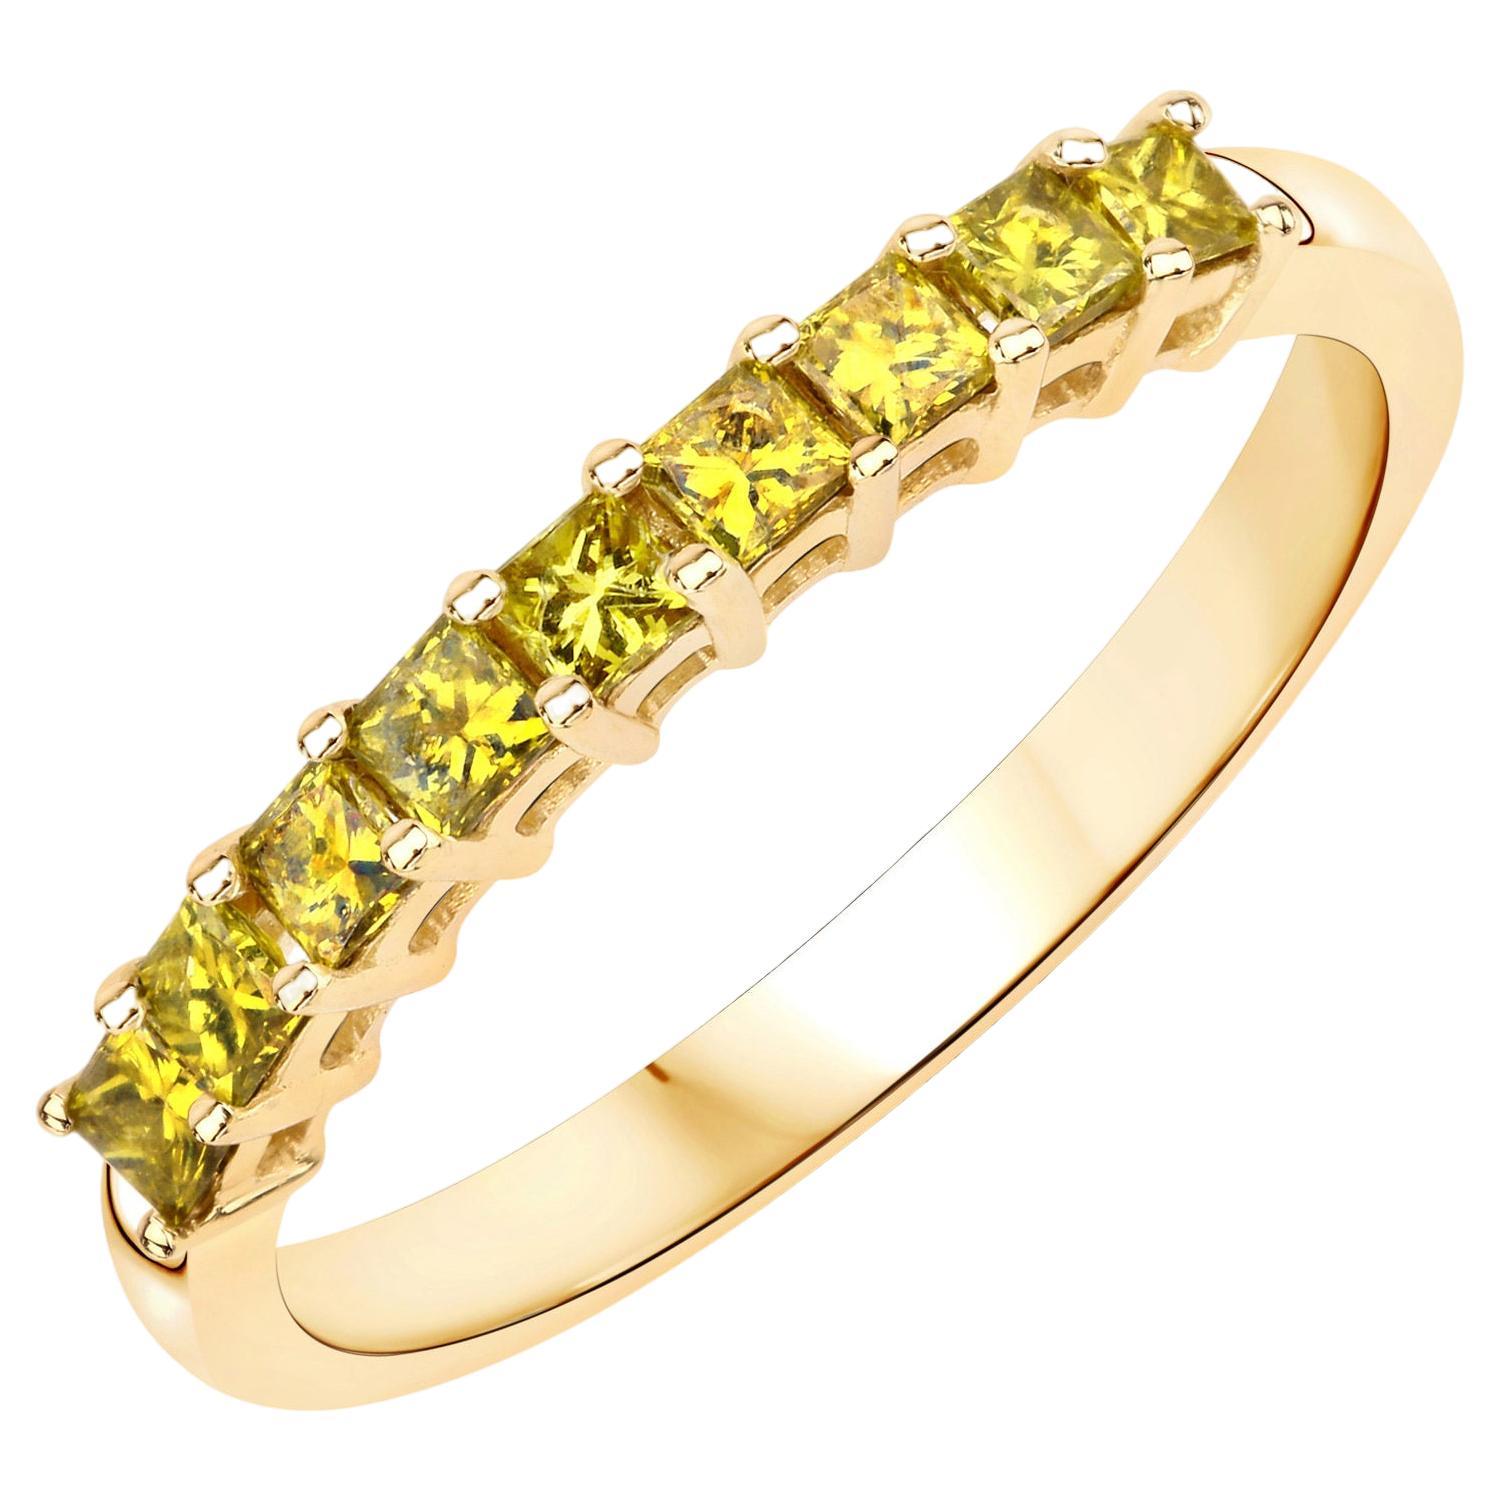 Natural Yellow Diamond Band Ring 0.45 Carats 14K Yellow Gold In Excellent Condition For Sale In Laguna Niguel, CA